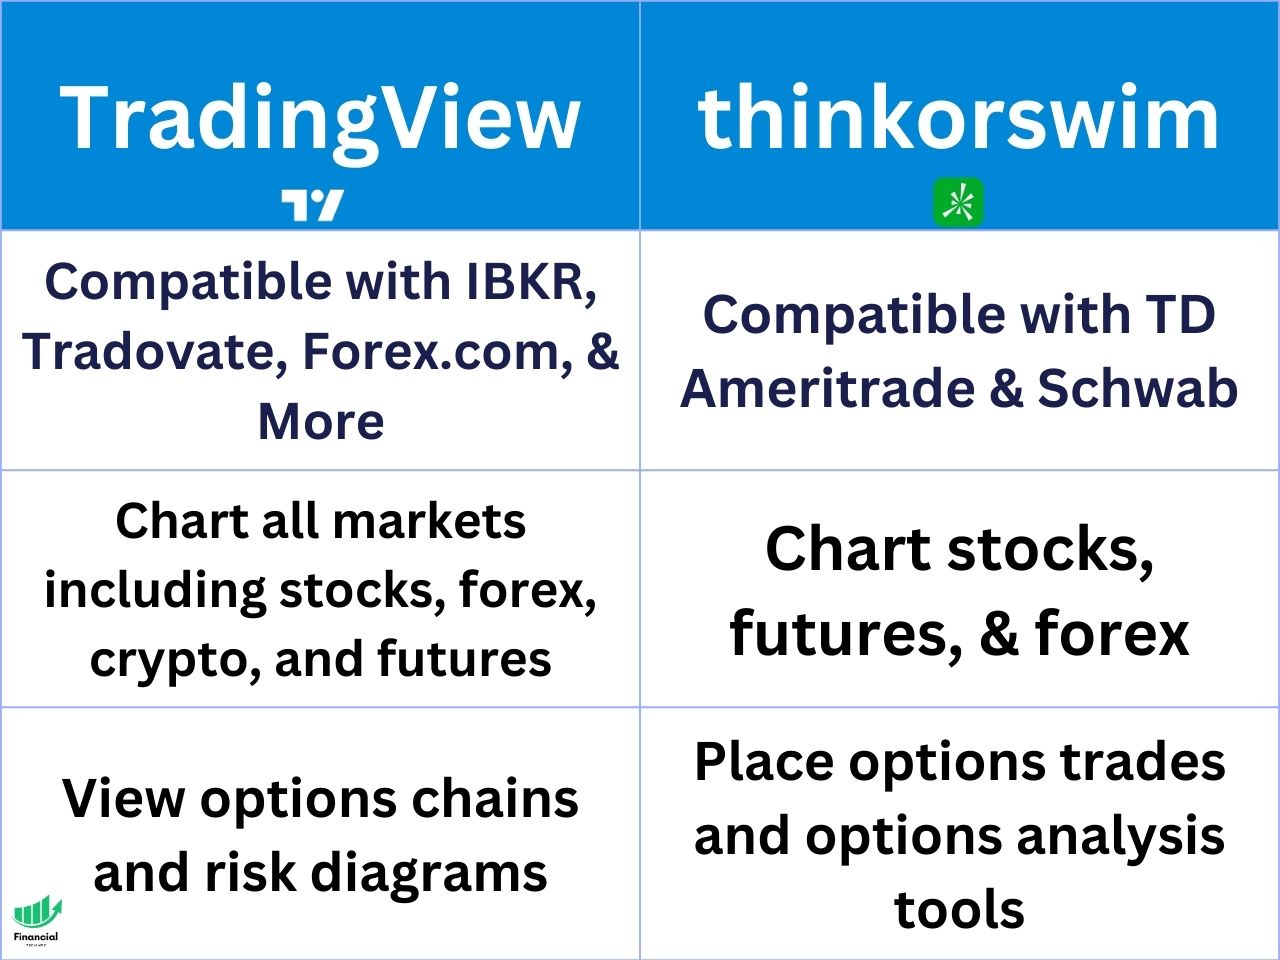 a table comparing tradingview and thinkorswim